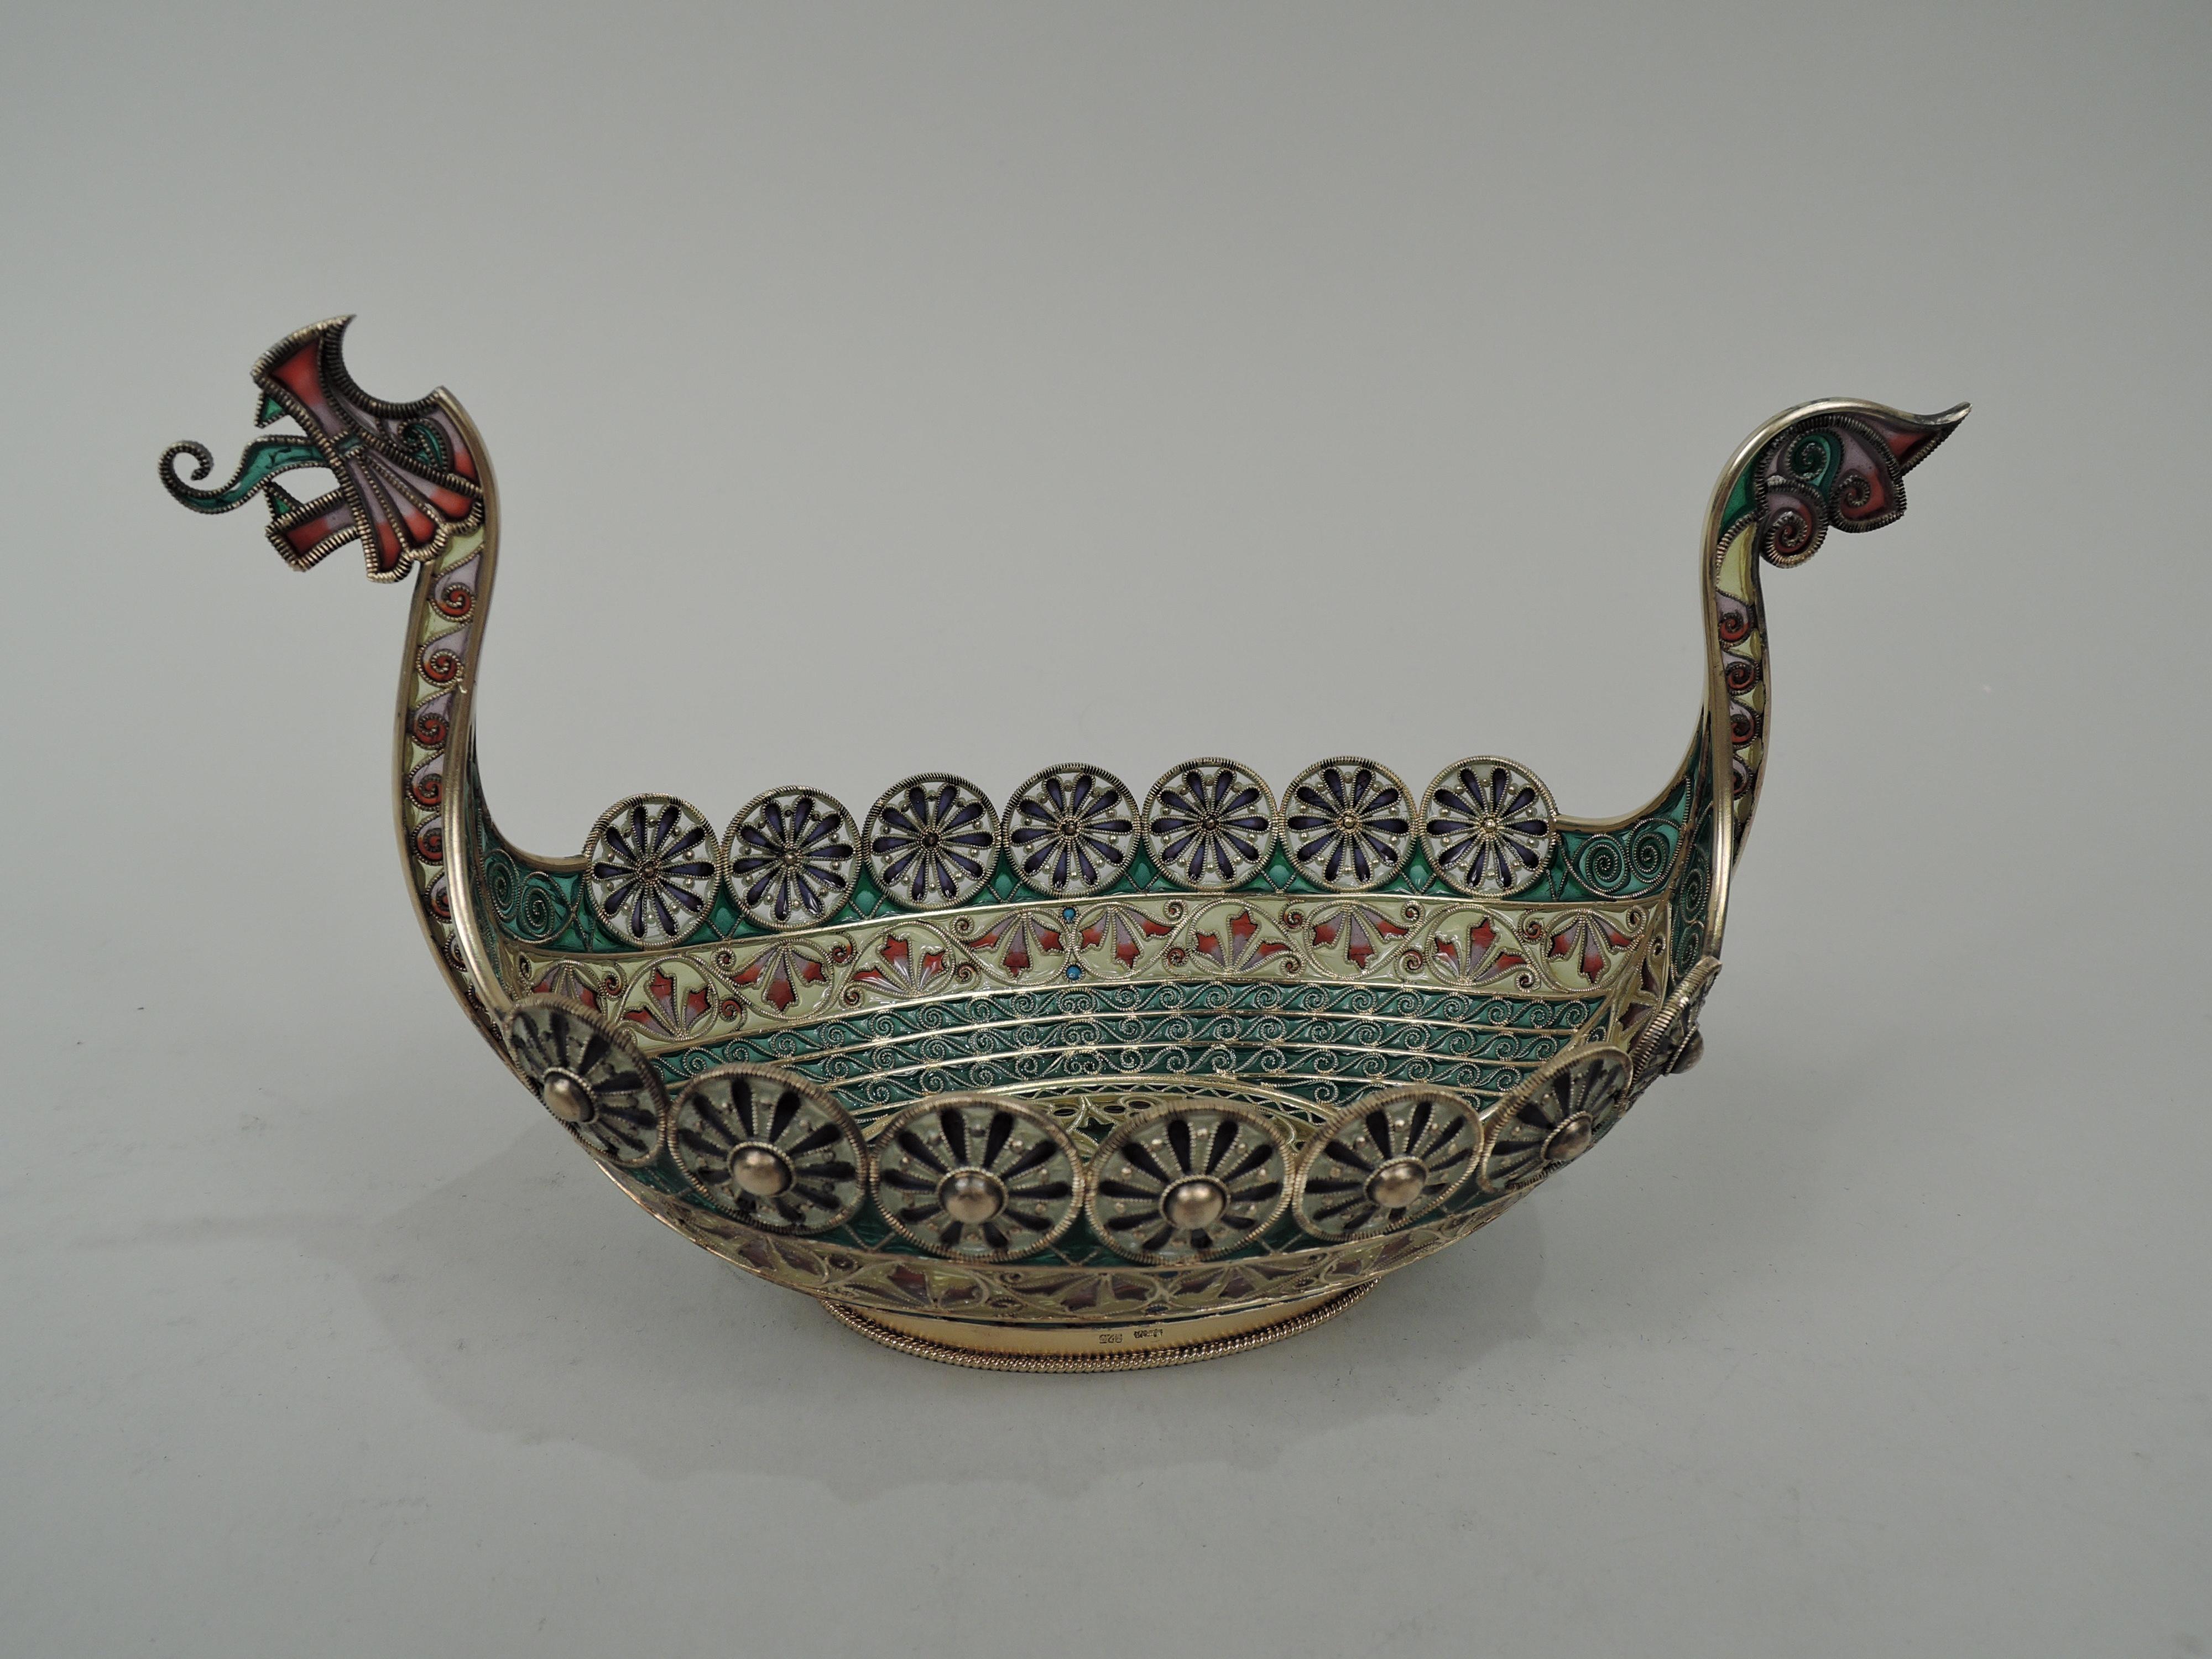 Plique à jour enamel and gilt sterling silver bowl. Made by David Andersen in Norway, circa 1925. Inspired by Viking longboat with dragonhead stem post and tail sternpost, and rim comprised of warrior’s shields. Oval form for stealthy gliding.